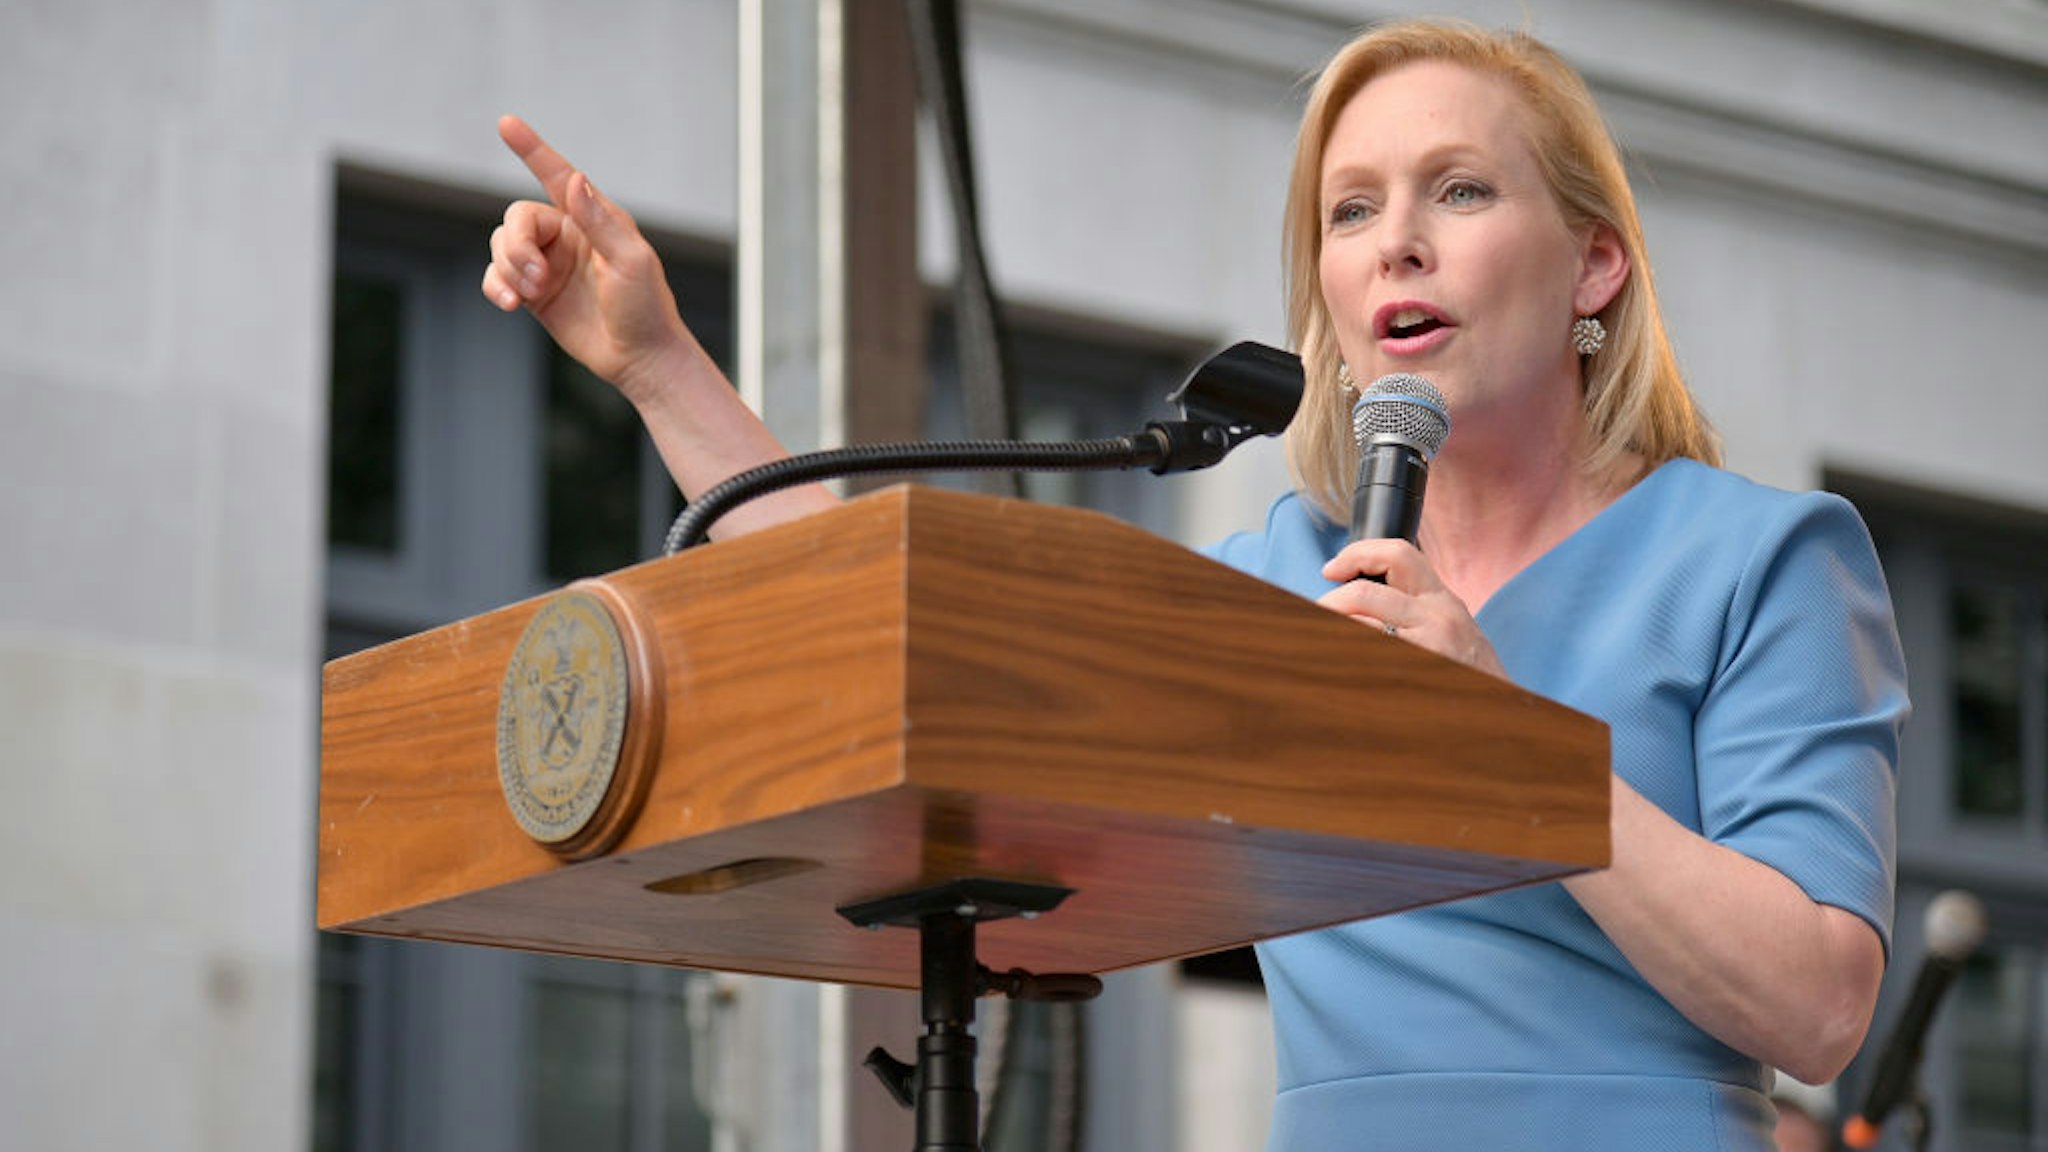 NEW YORK, NEW YORK - JUNE 28: United States Senator Kirsten Gillibrand addresses attendees during the Stonewall 50th Commemoration rally during WorldPride NYC 2019 on June 28, 2019 in New York City.